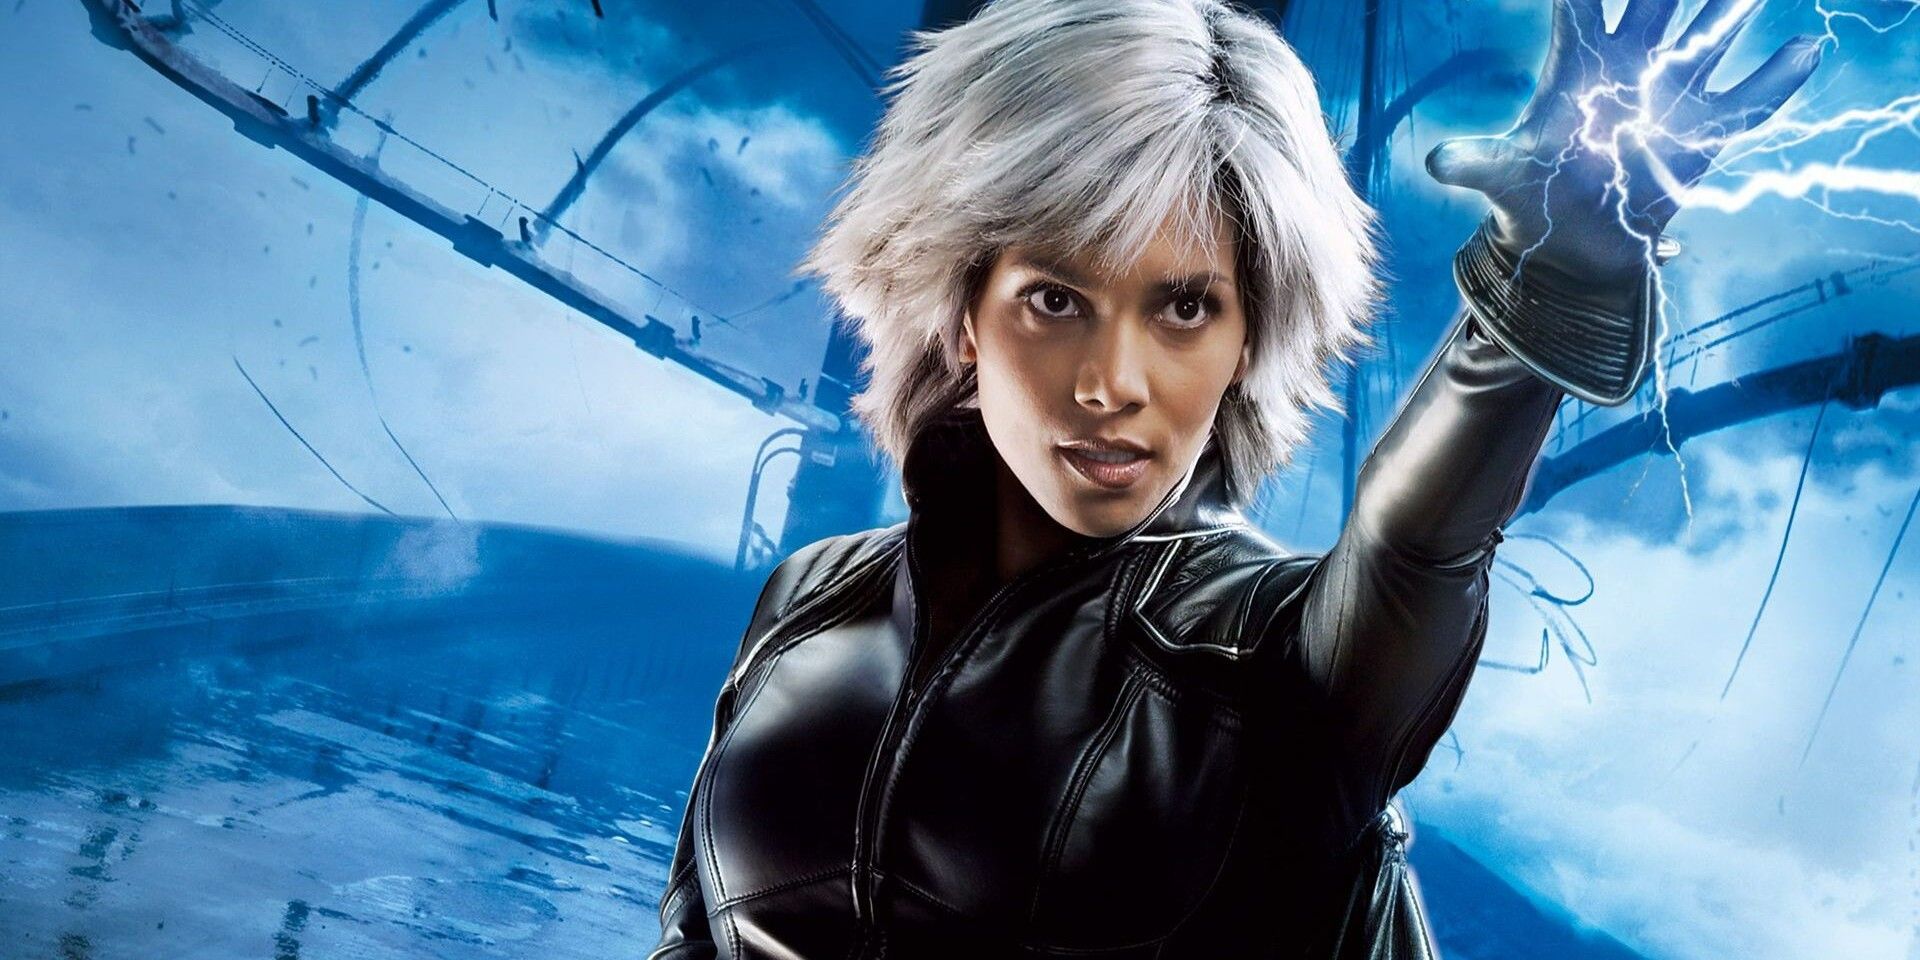 Storm (Halle Berry) creating lightning on a promo poster for the X-Men movies